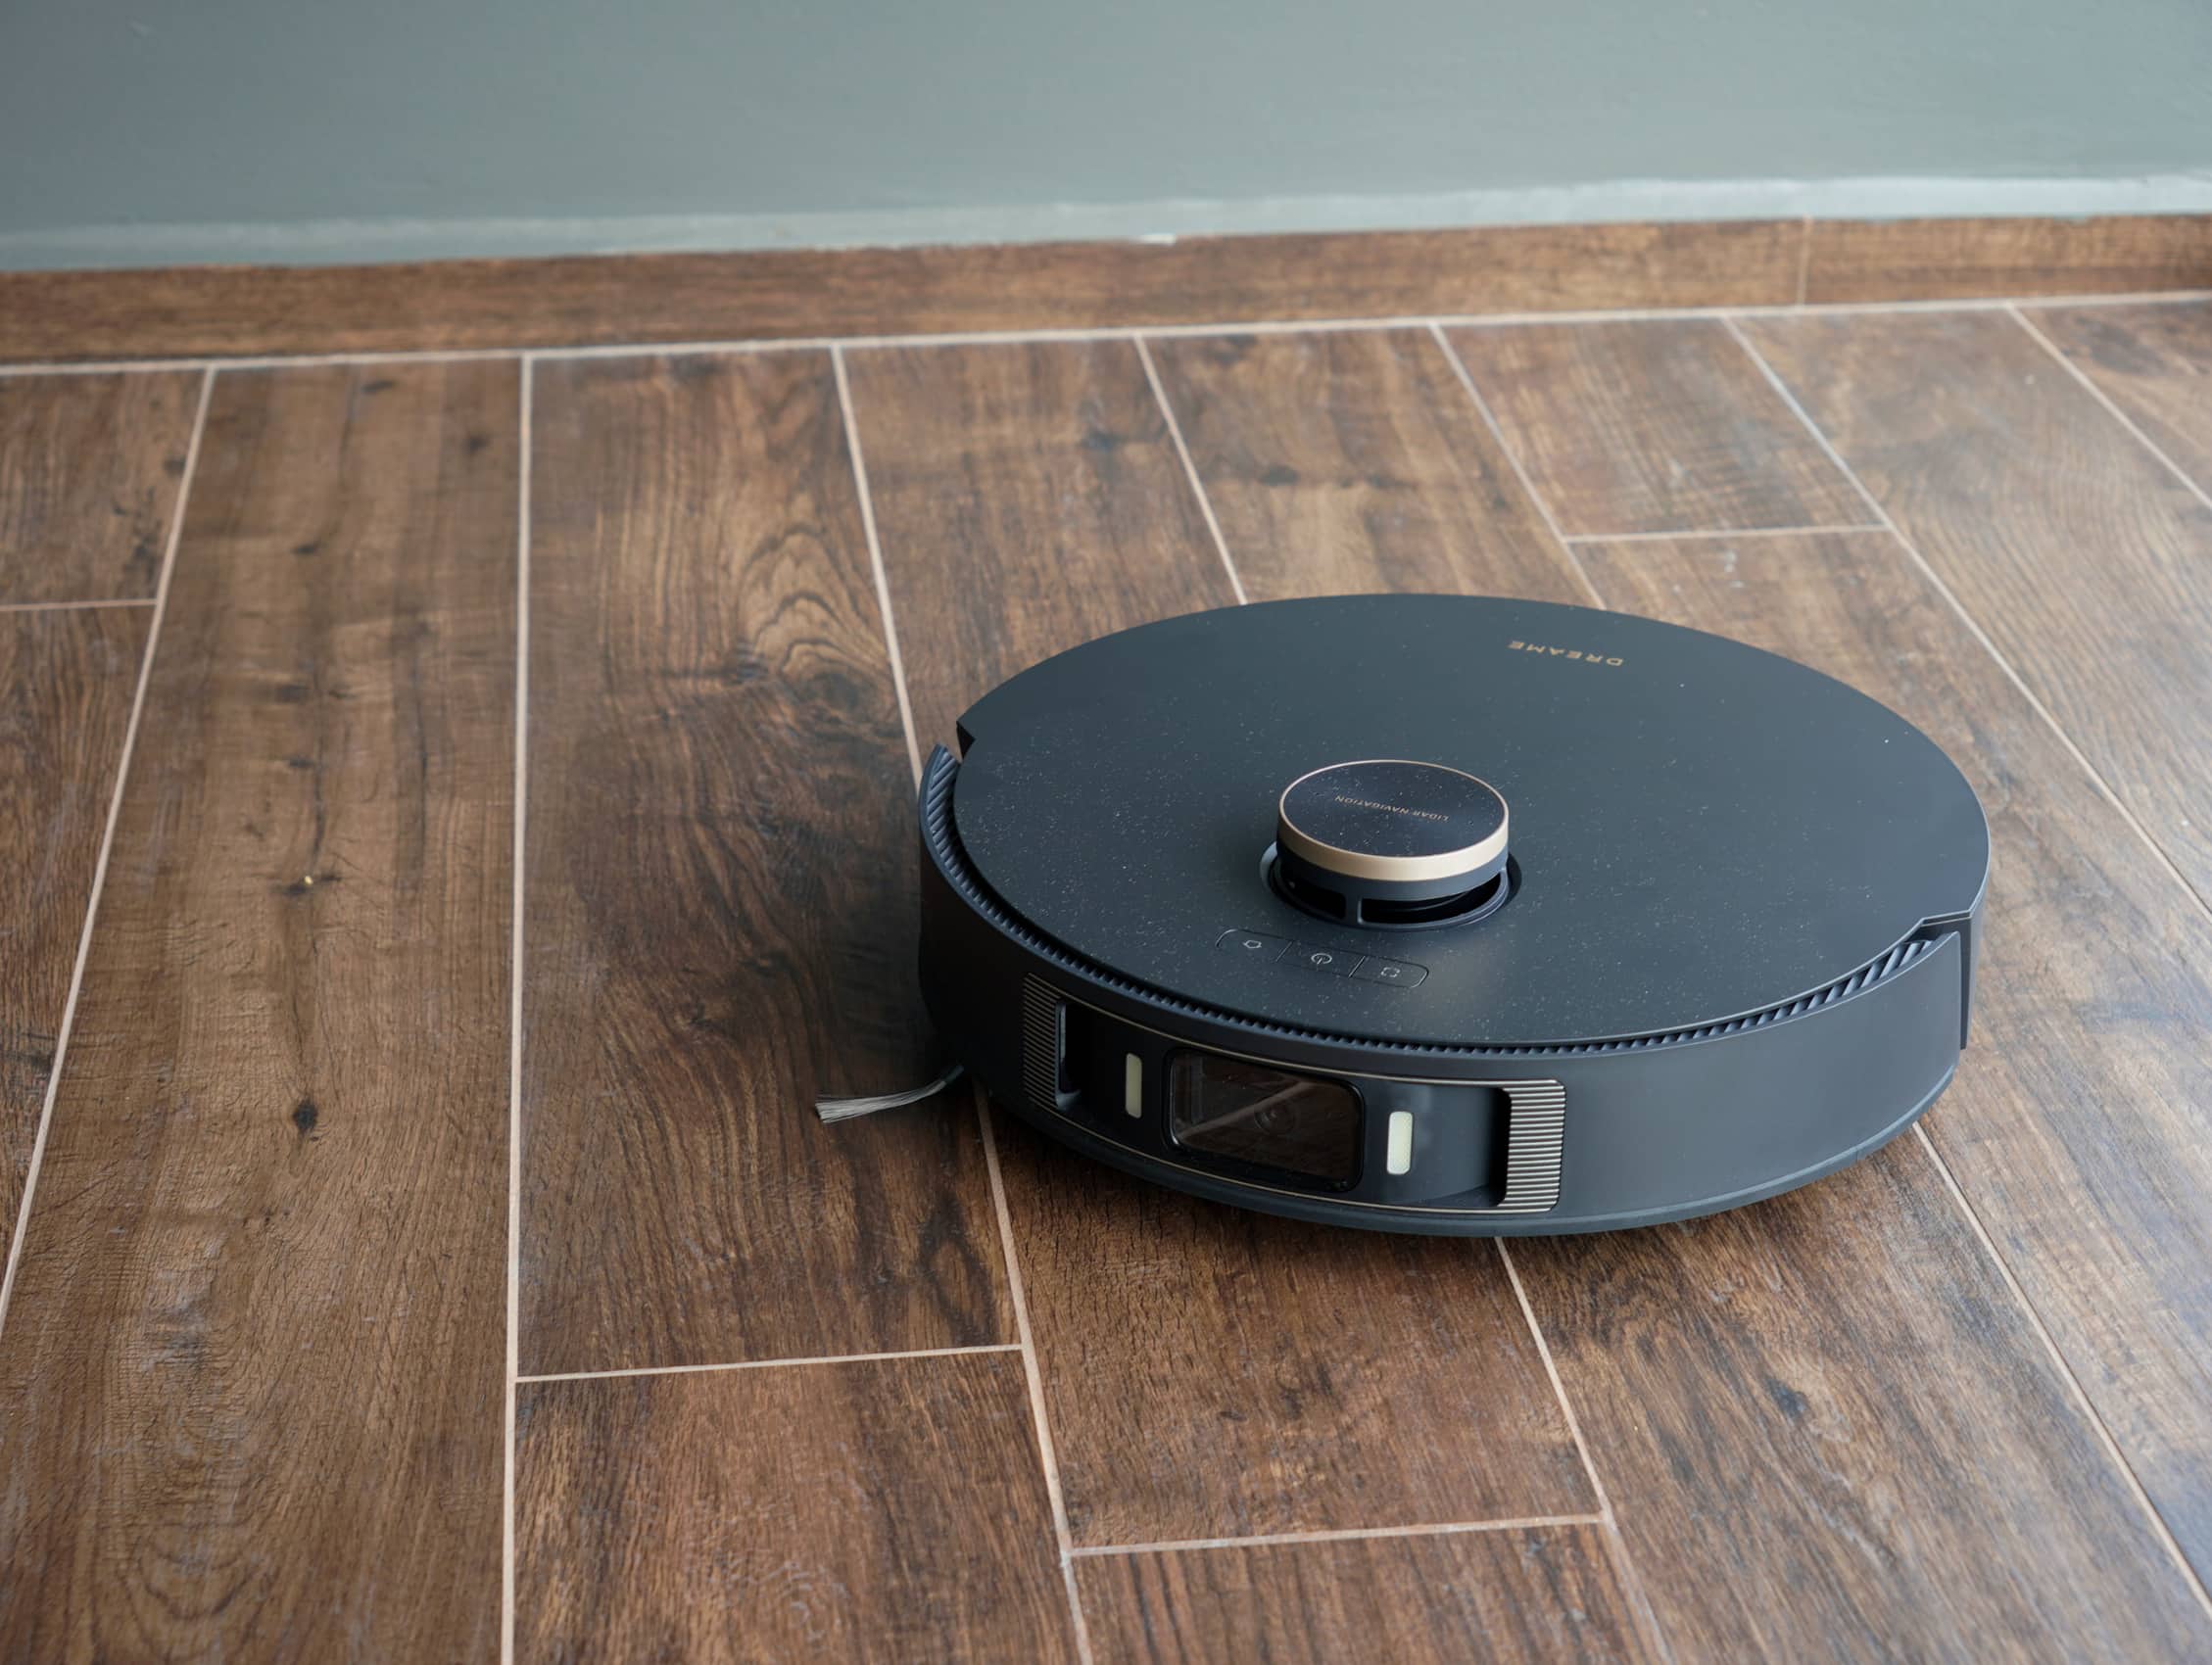 Dreame L20 Ultra review: the unrivaled robot vacuum cleaner